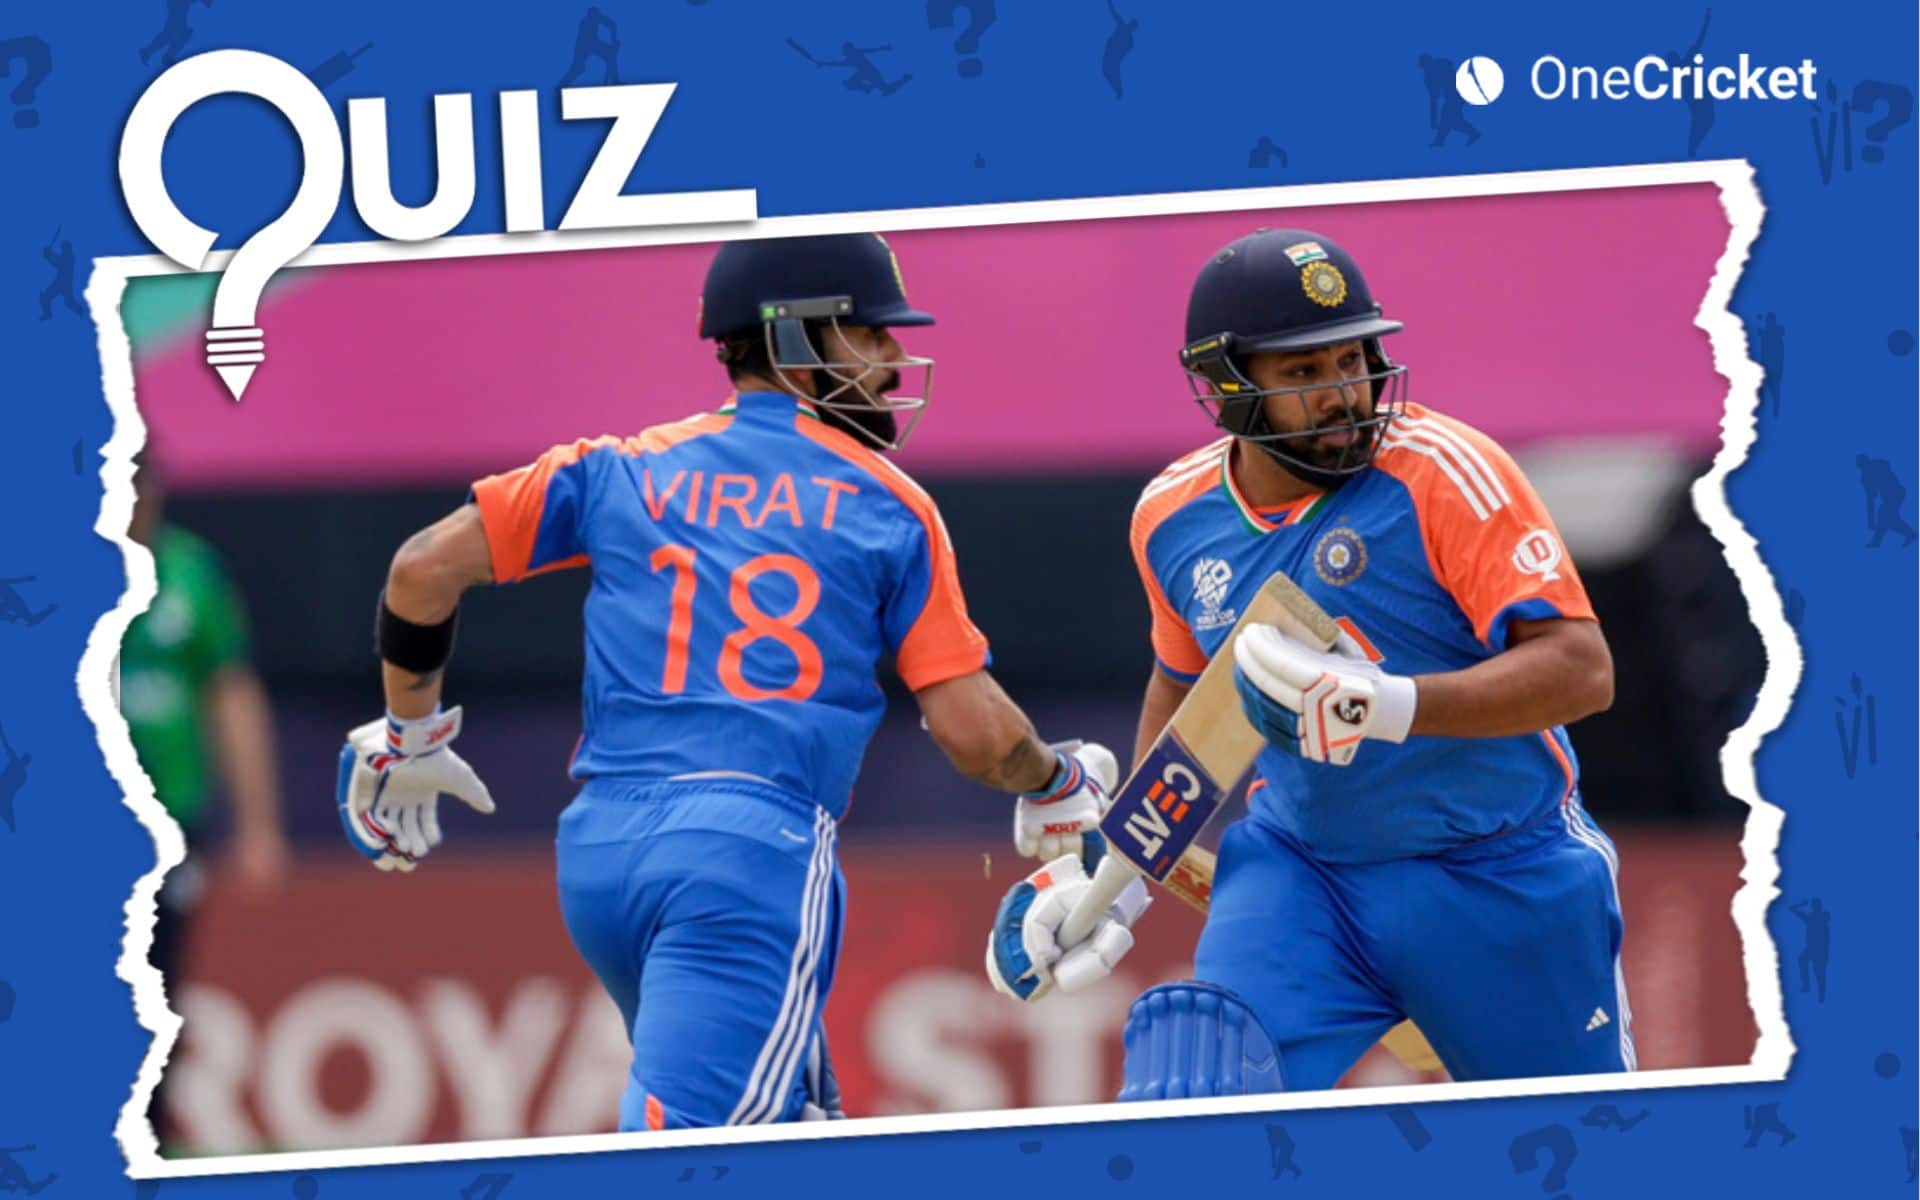 Cricket Quiz: Can You Ace This Virat Kohli And Rohit Sharma Quiz vs BAN ? Test Your Knowledge